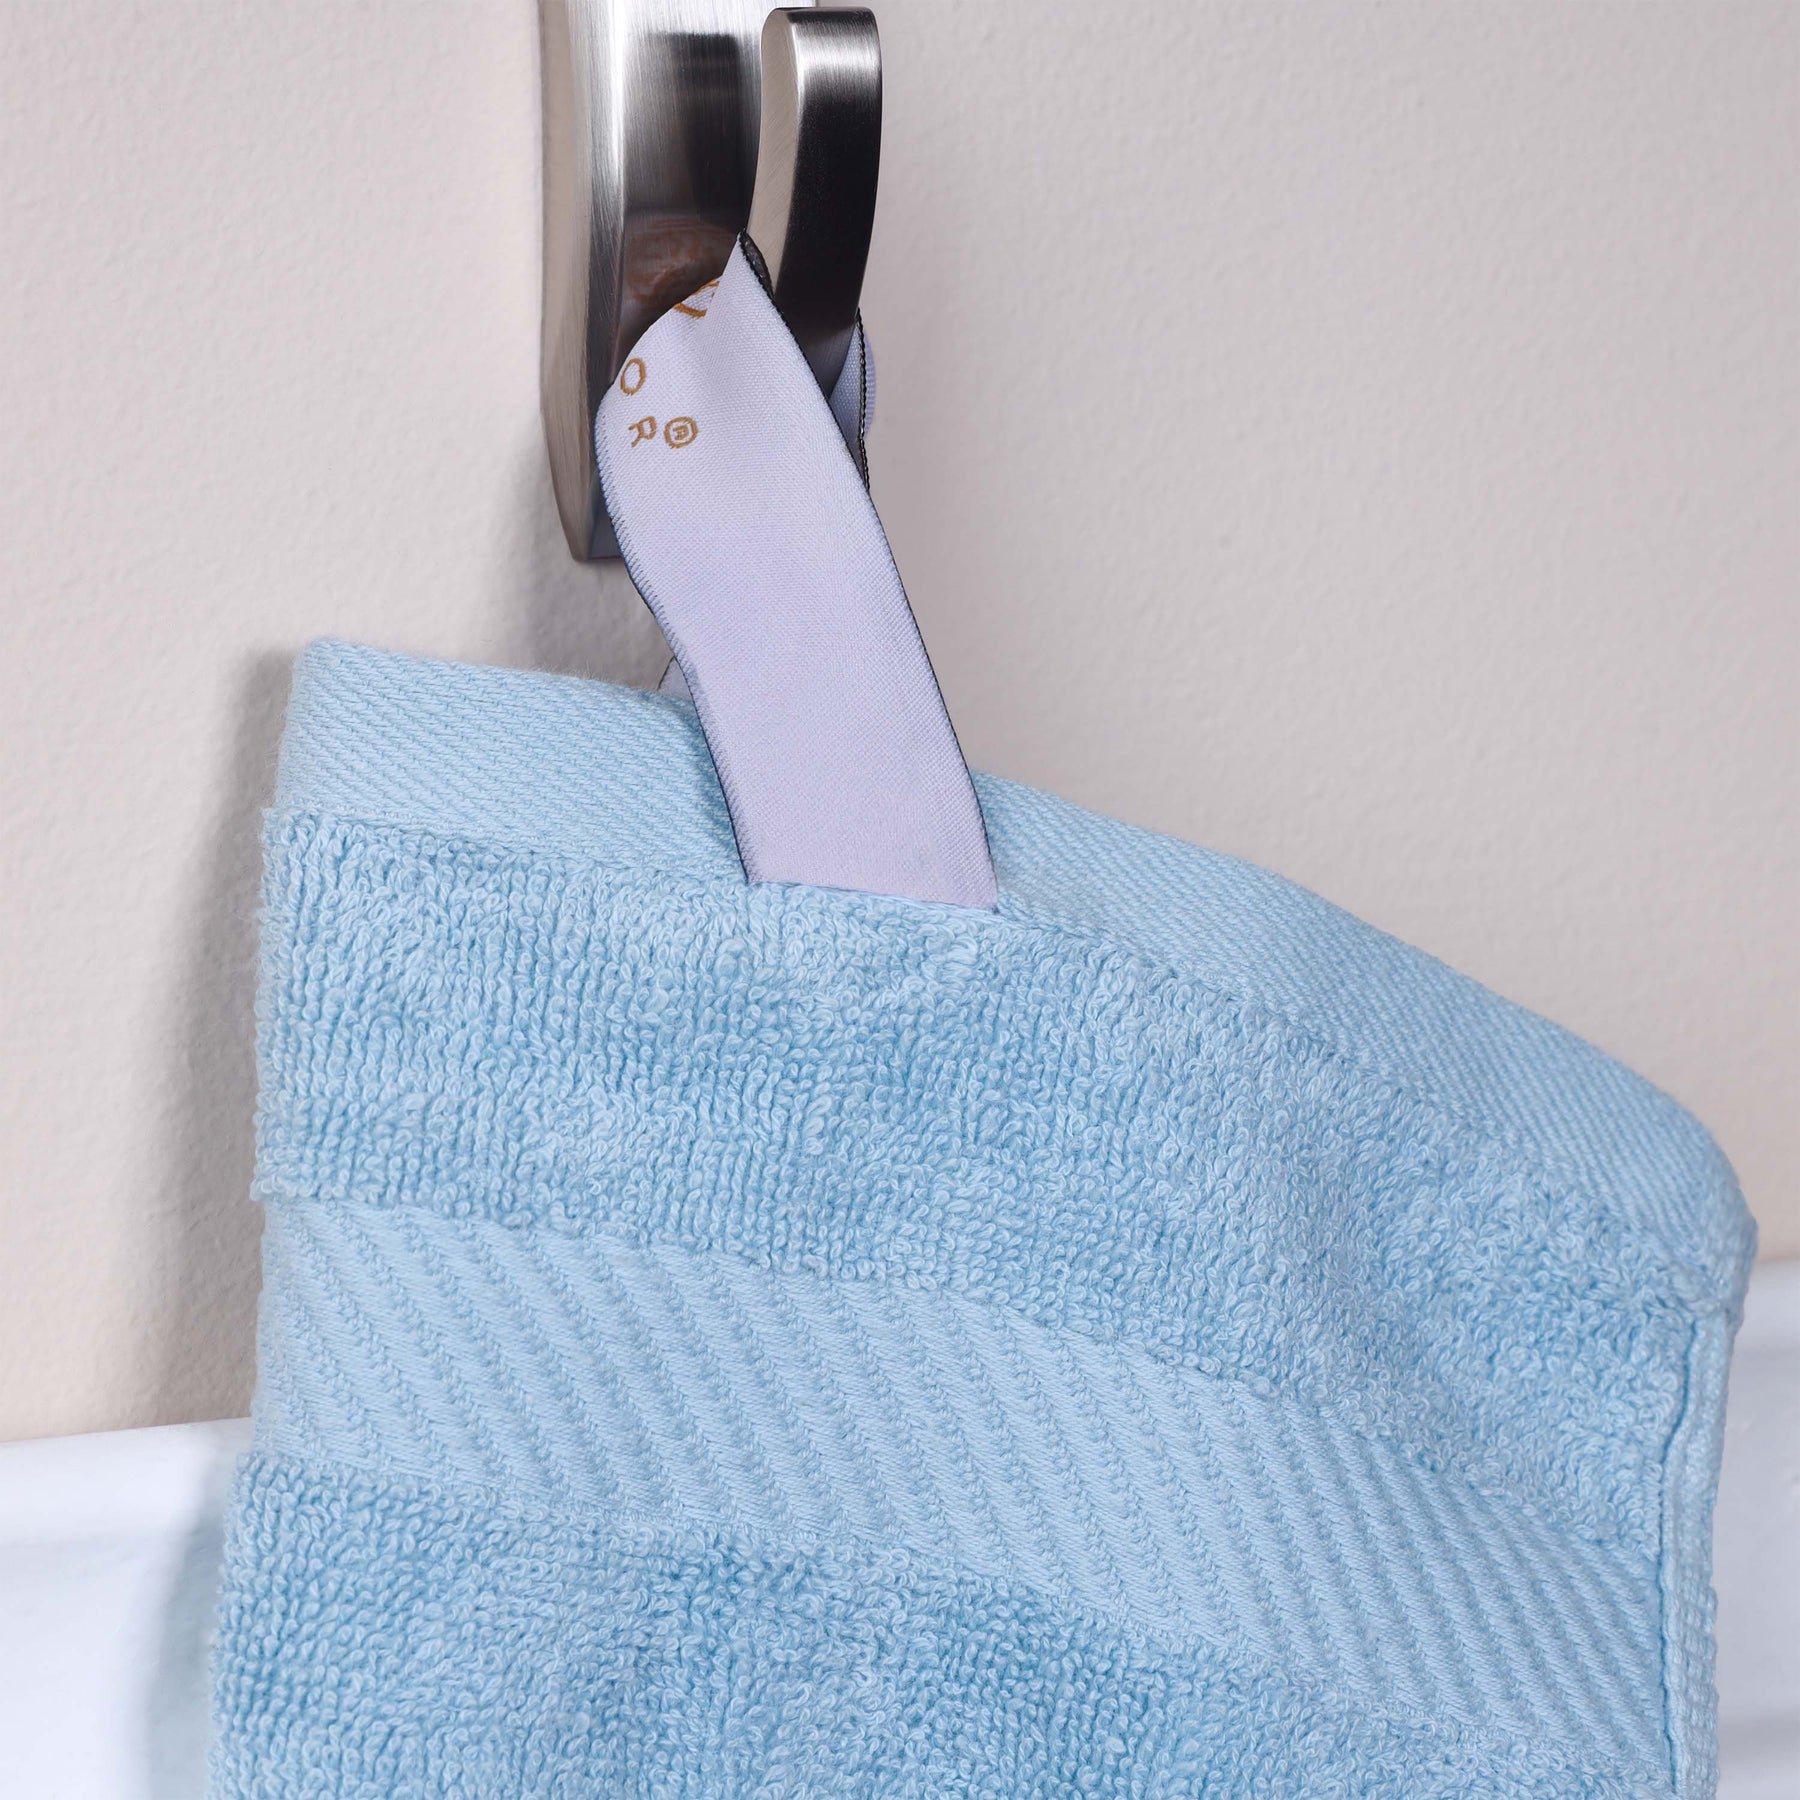 Kendell Egyptian Cotton Solid Medium Weight Bath Towel Set of 2 - WinterBlue